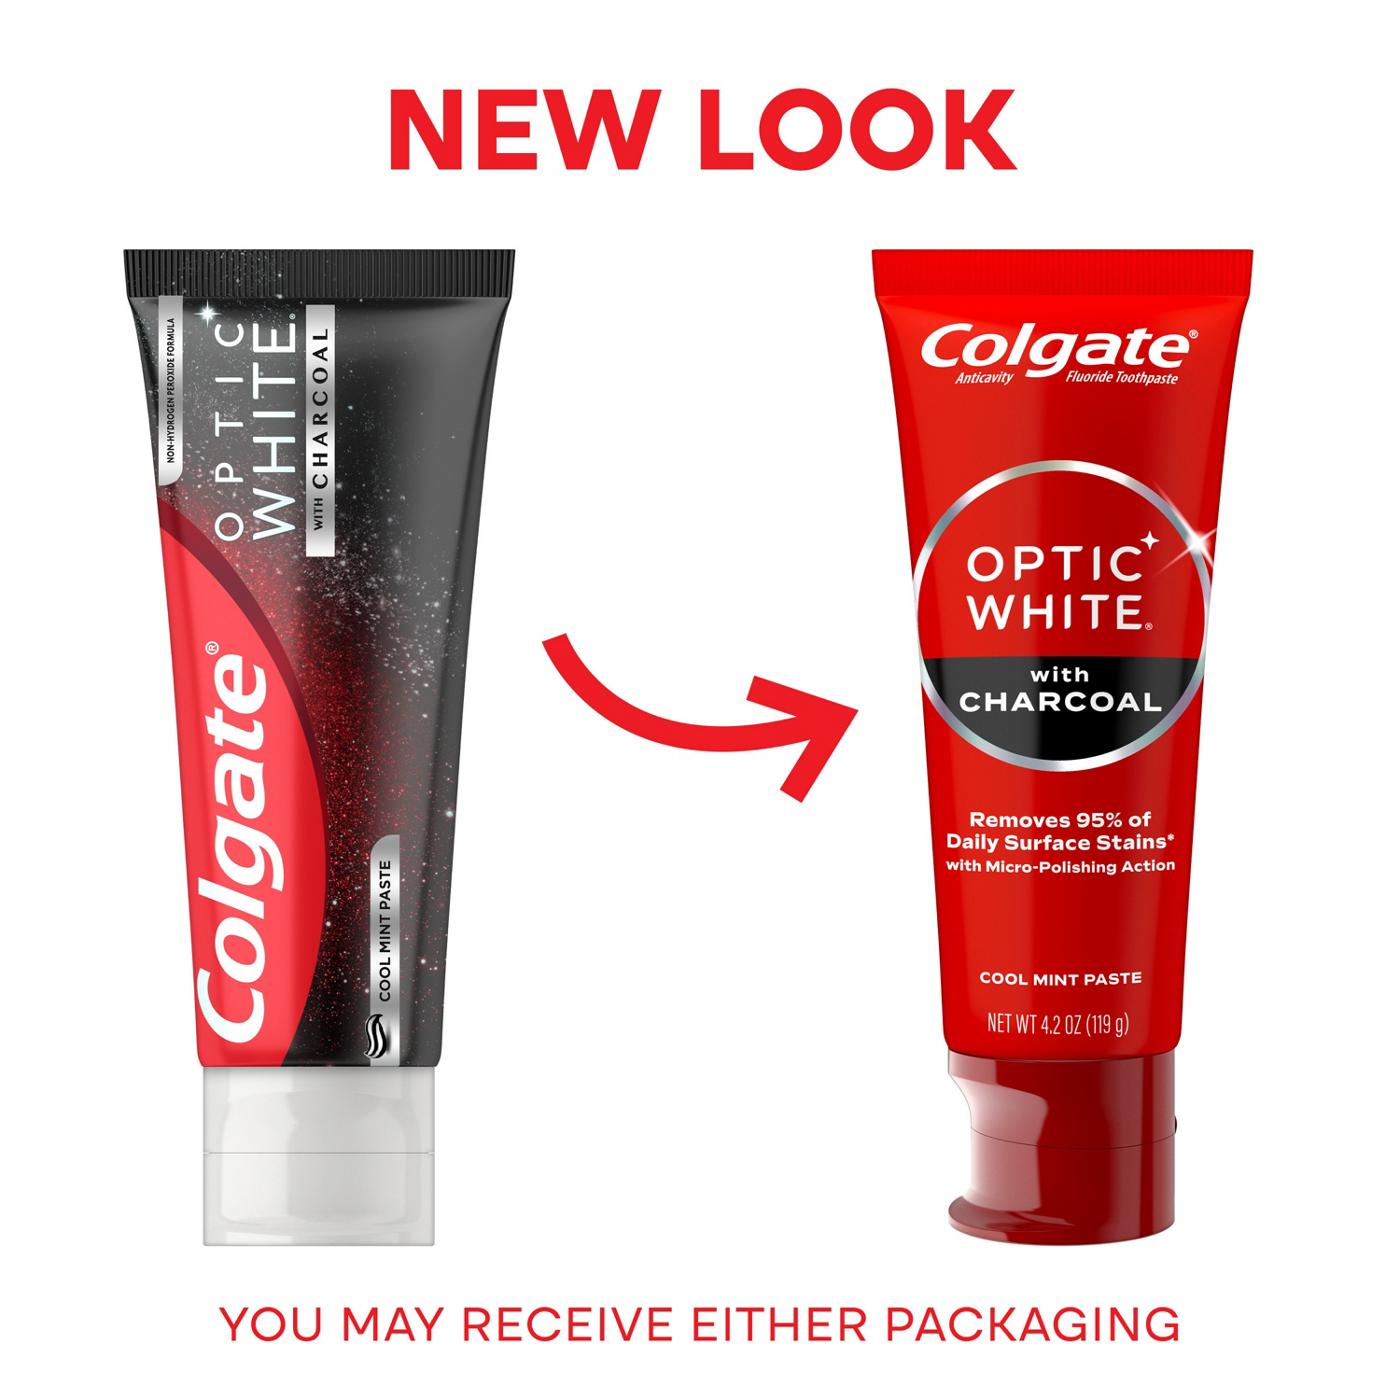 Colgate Optic White with Charcoal Anticavity Toothpaste - Cool Mint; image 7 of 10